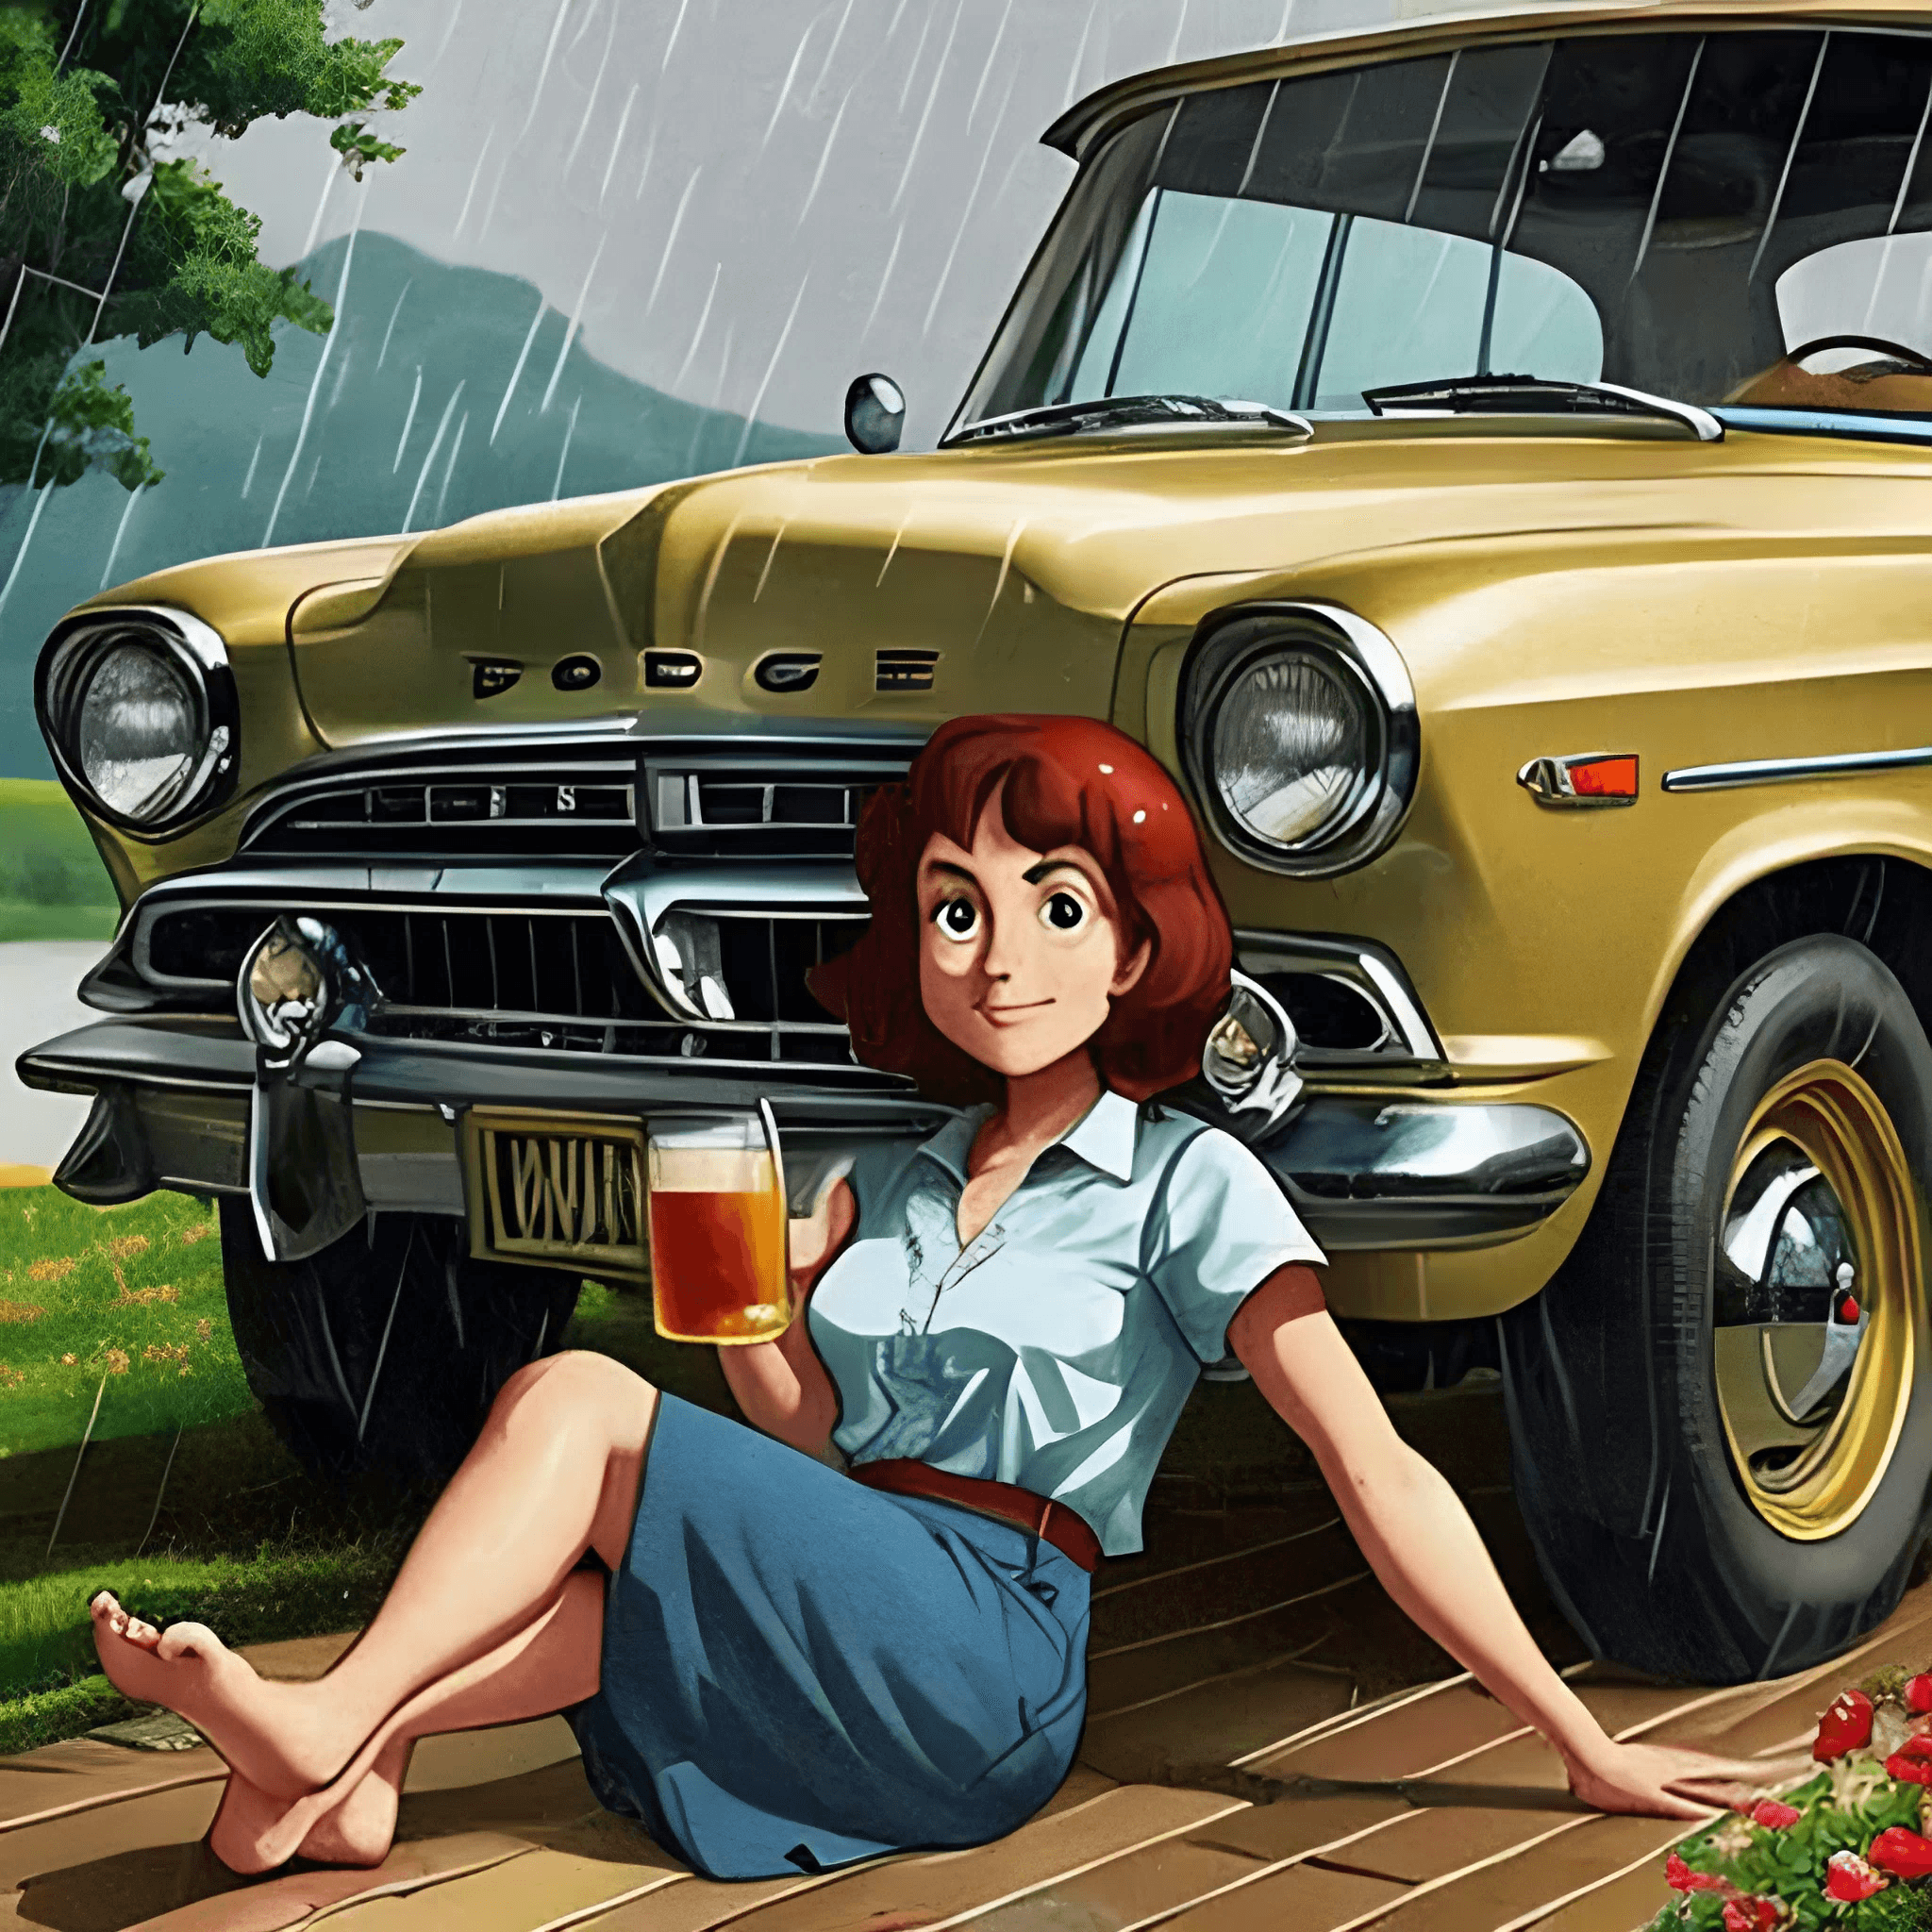 "Barefoot girl sitting on the hood of a Dodge. Drinking warm beer in the soft summer rain"